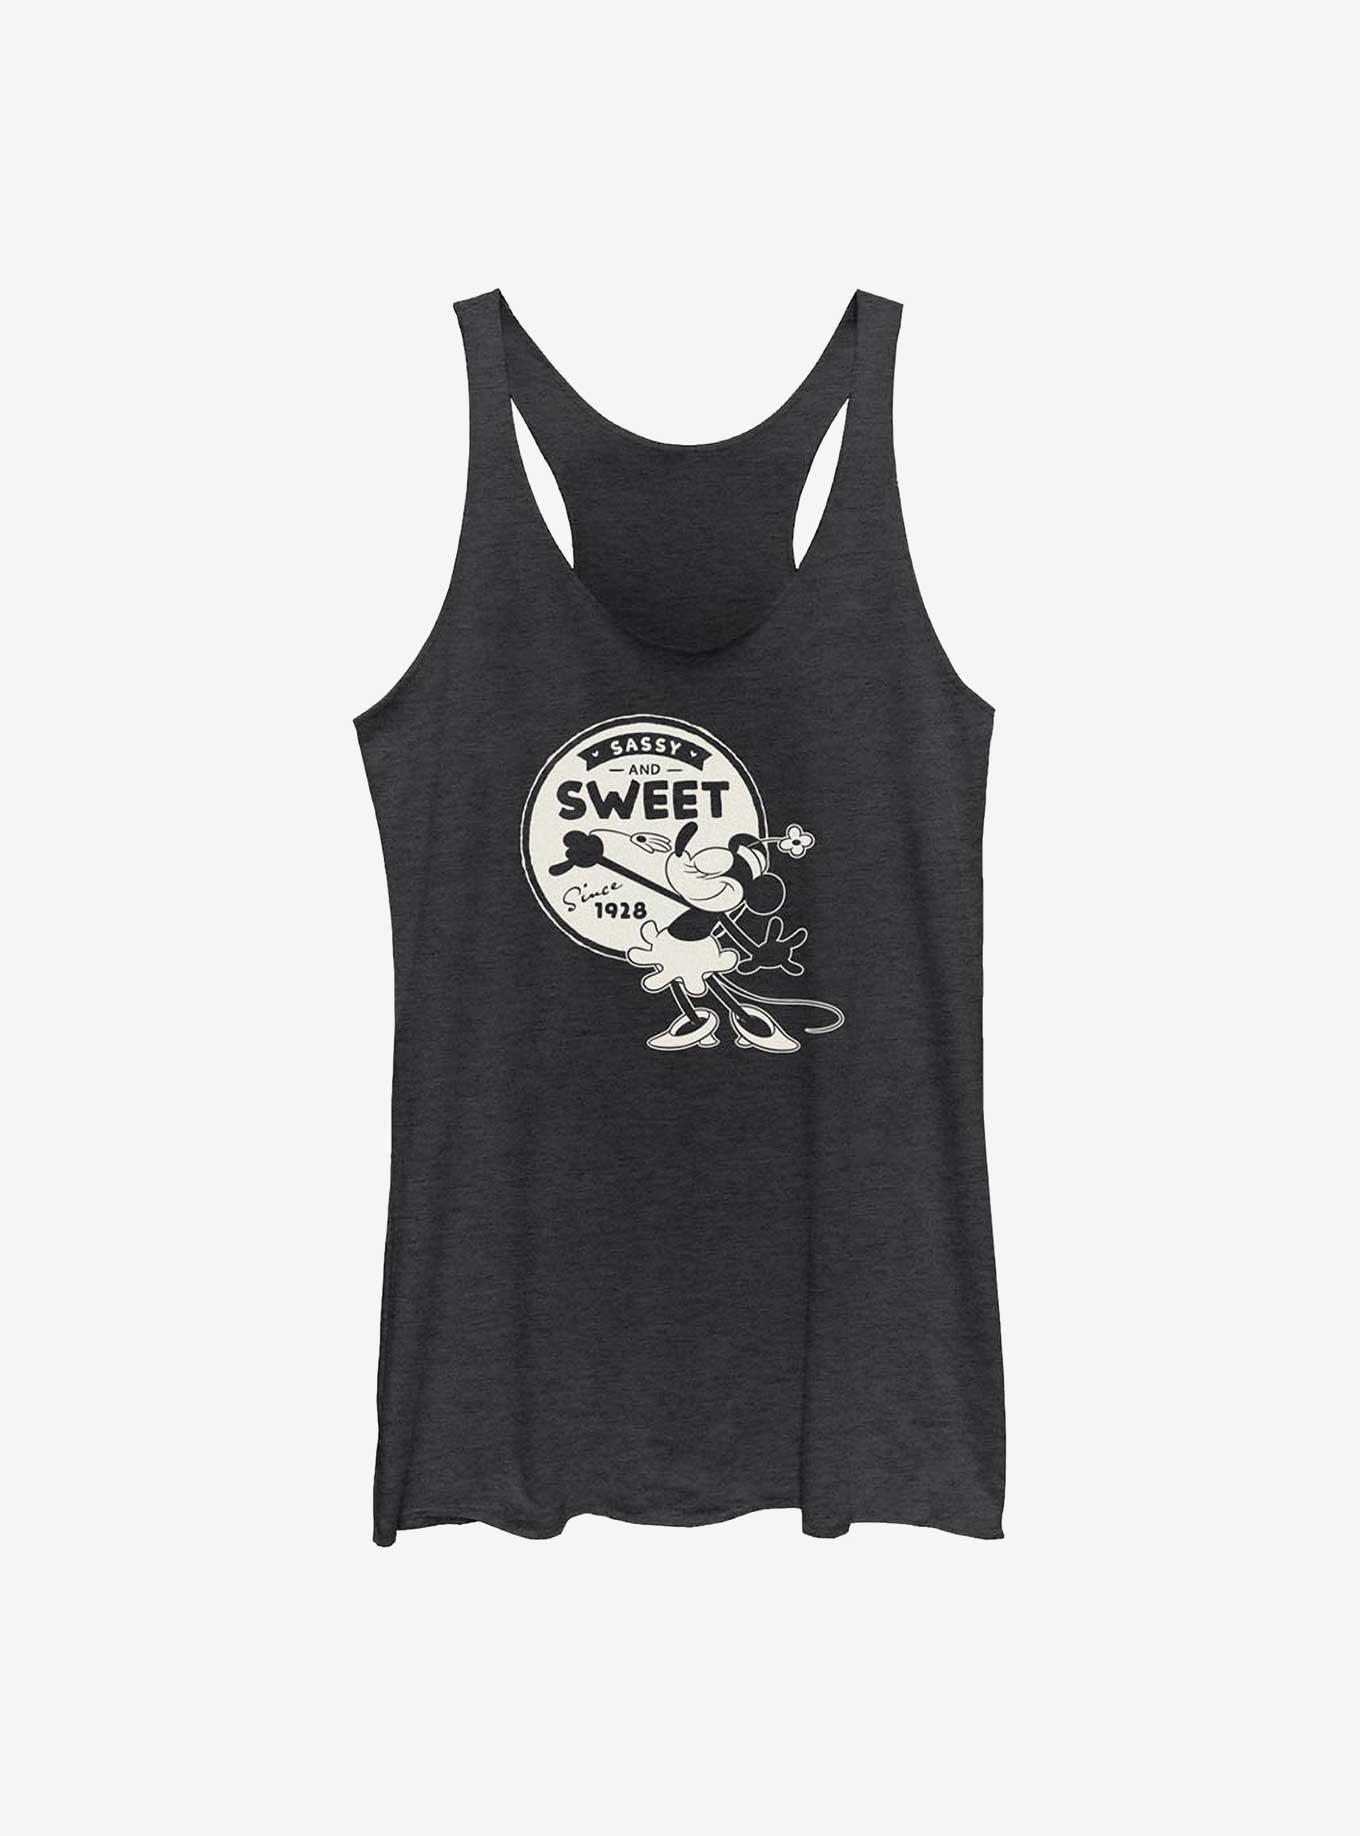 Disney100 Minnie Mouse Sassy and Sweet Girls Tank